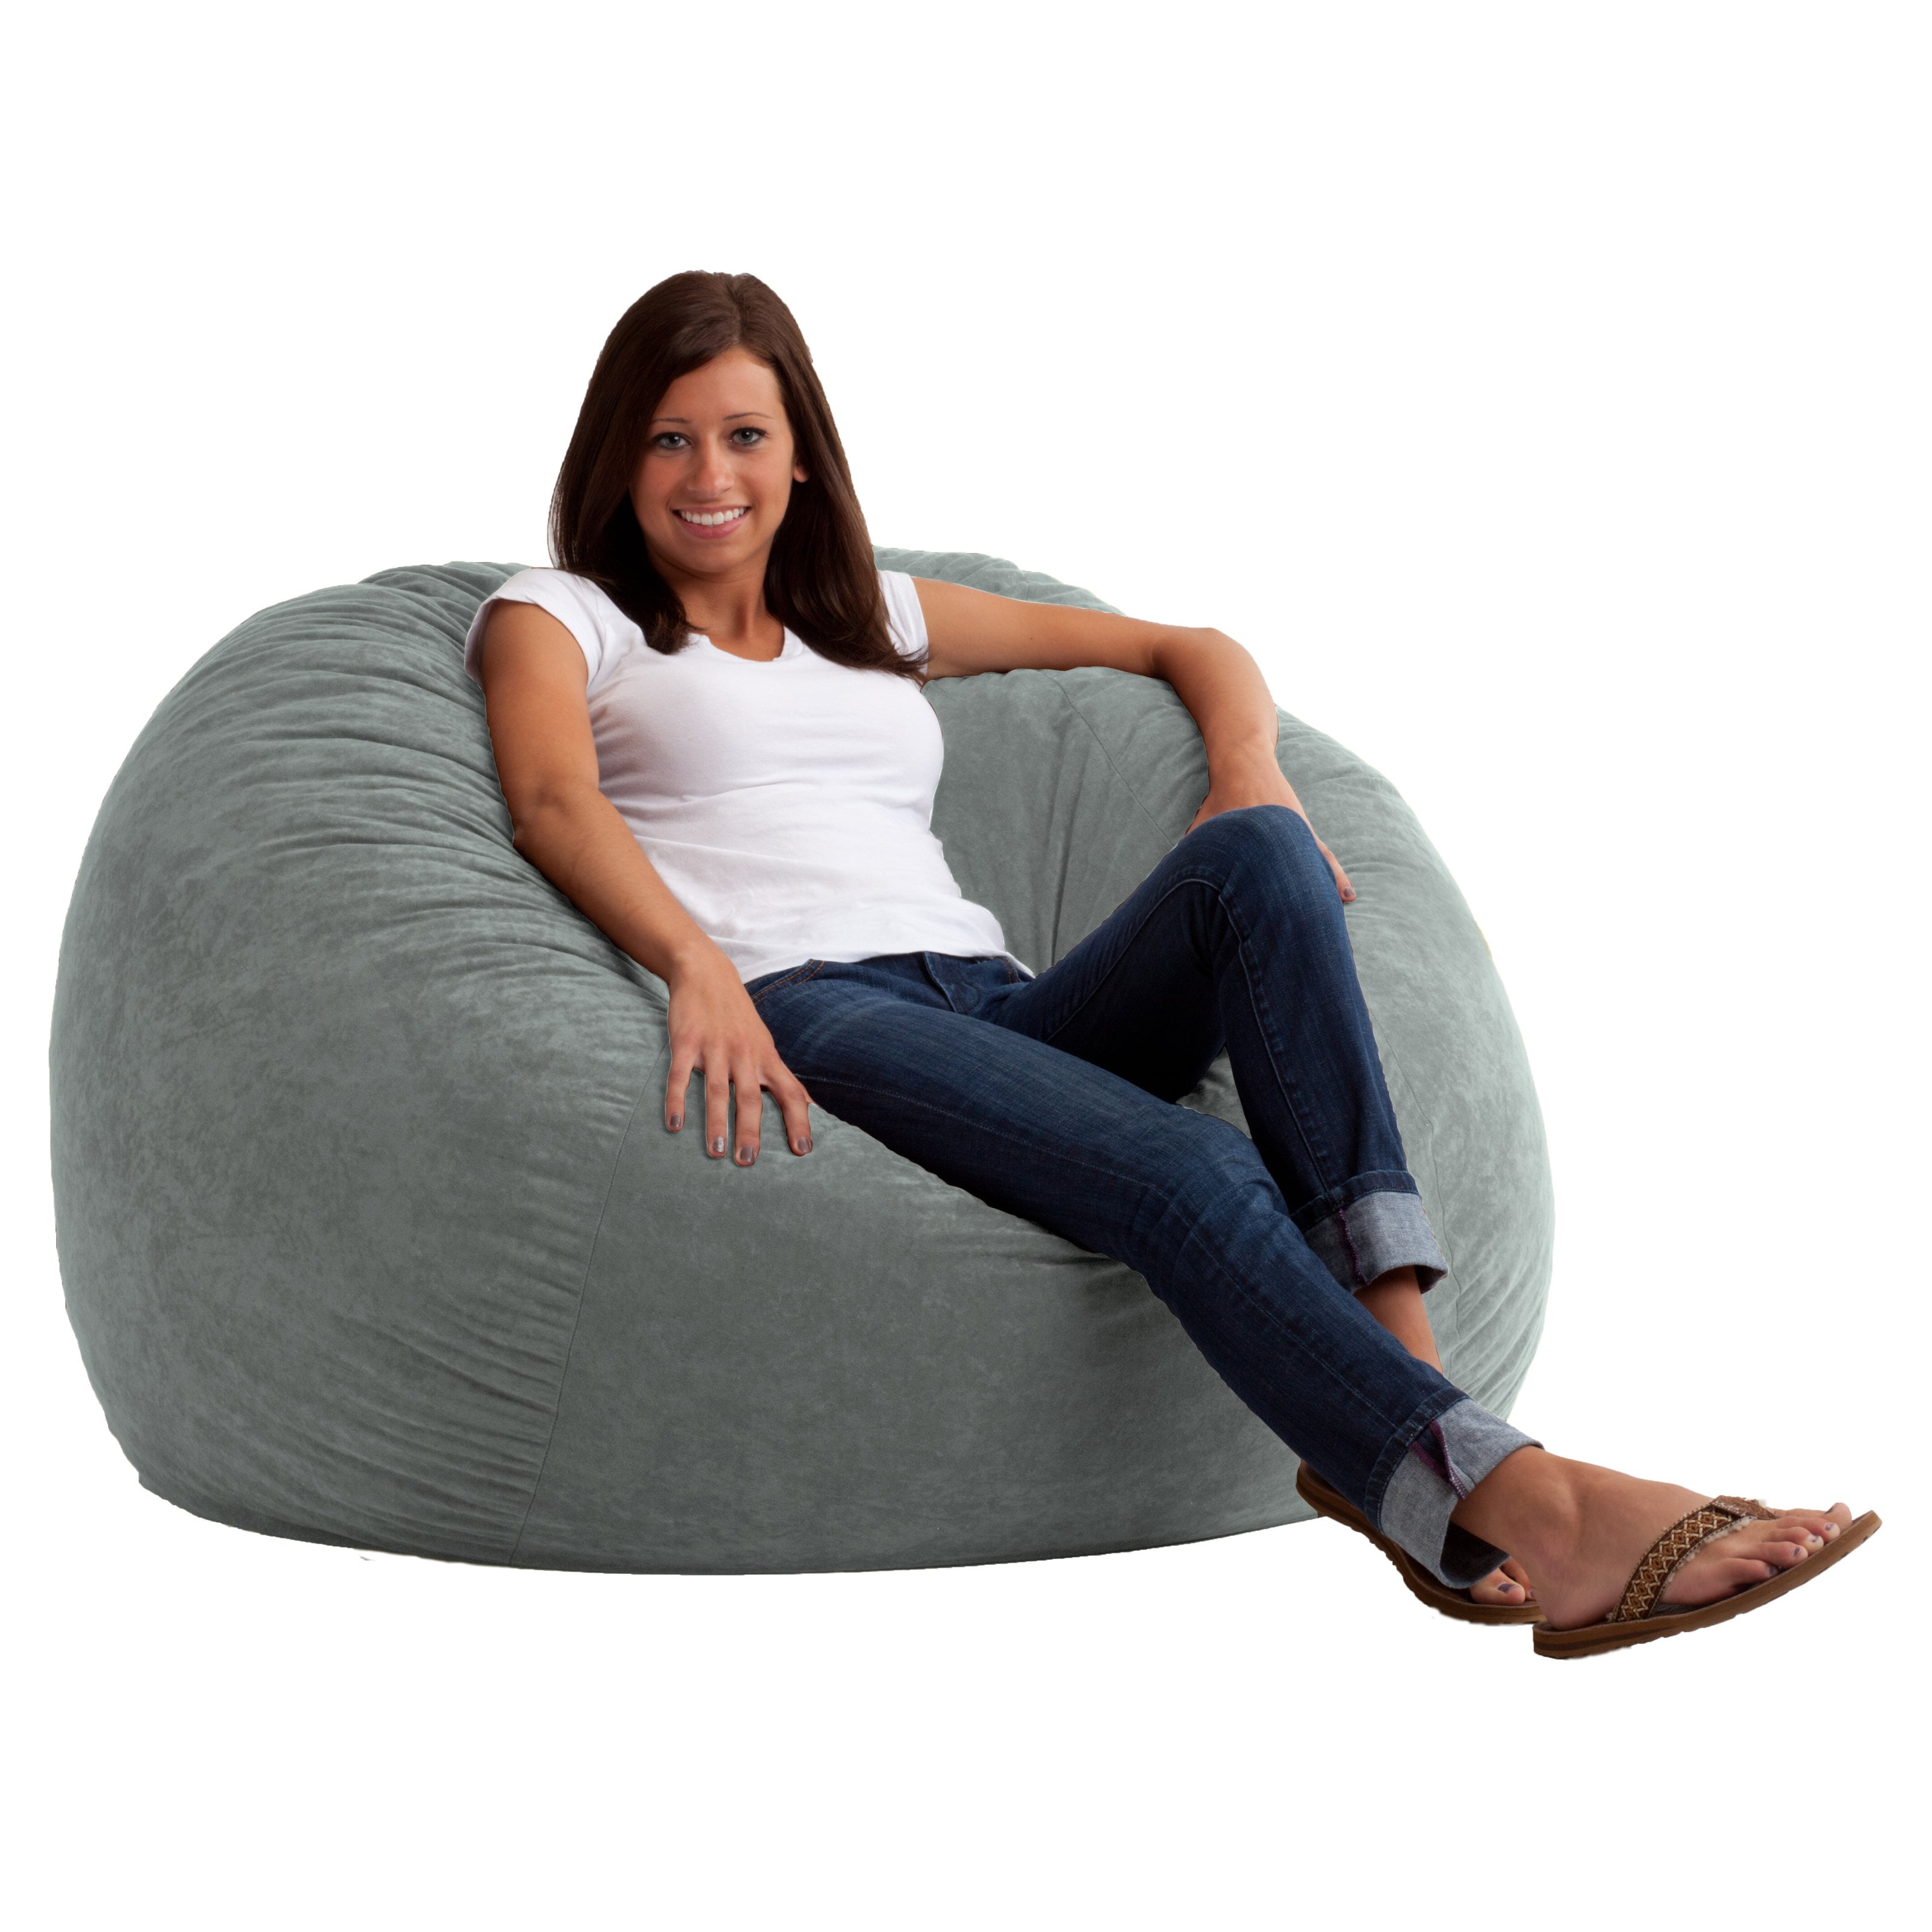 Affordable Bean Bags For Casual Seating